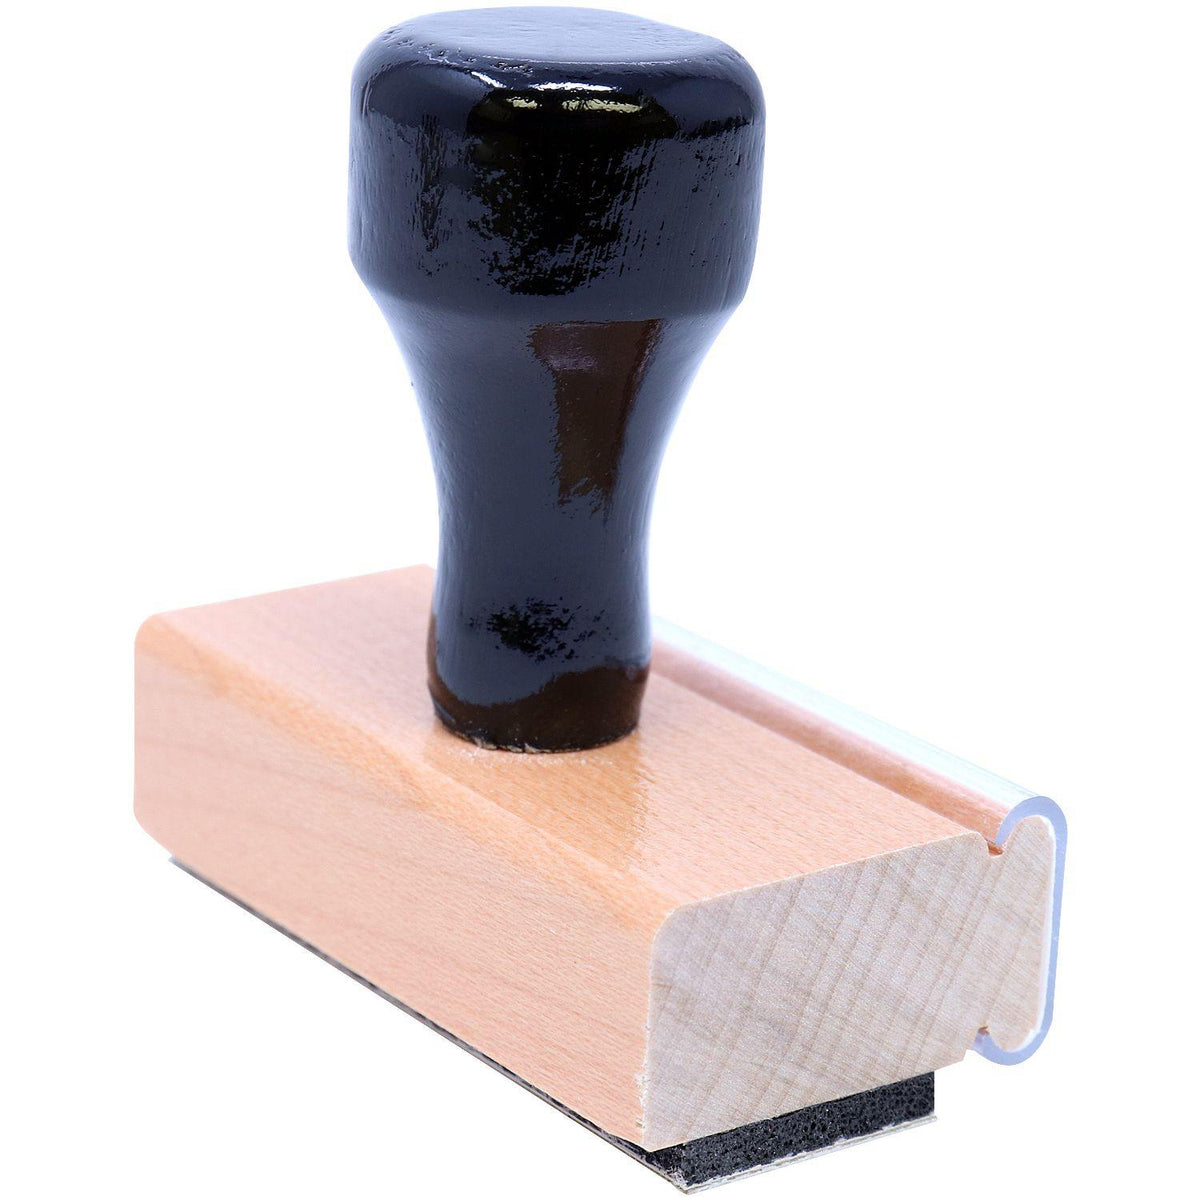 Alt View Confidential with Envelope Rubber Stamp Back Angle